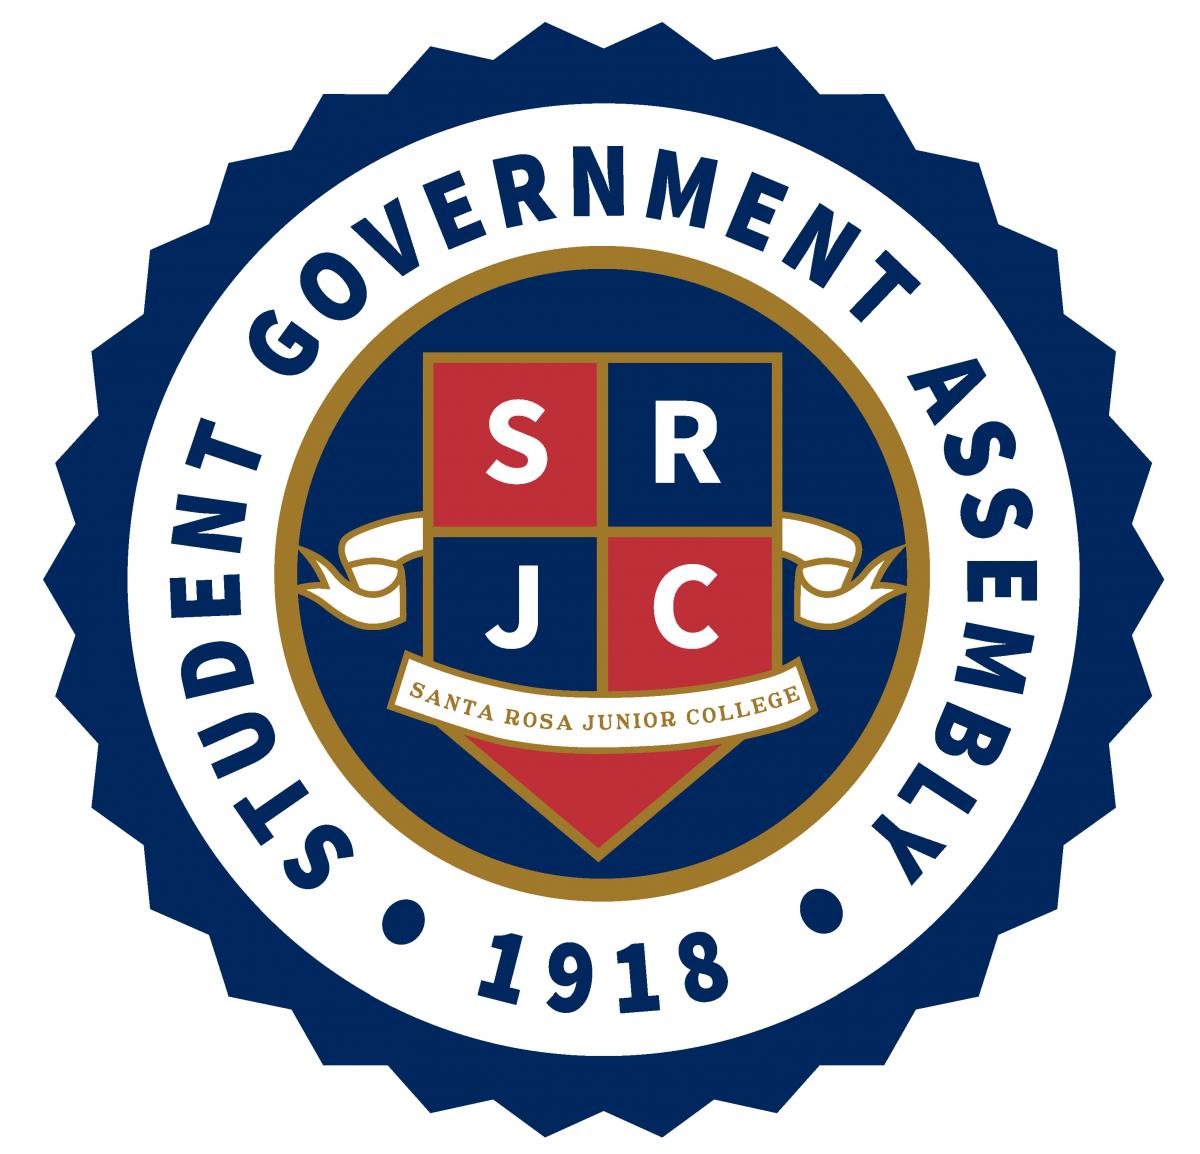 SGA approved funds for an end of the year Student leadership banquet and approved a new transportation program that offers students a discounted 31-day pass for the SMART trainSRJC’s at the May 11 SGA meeting.